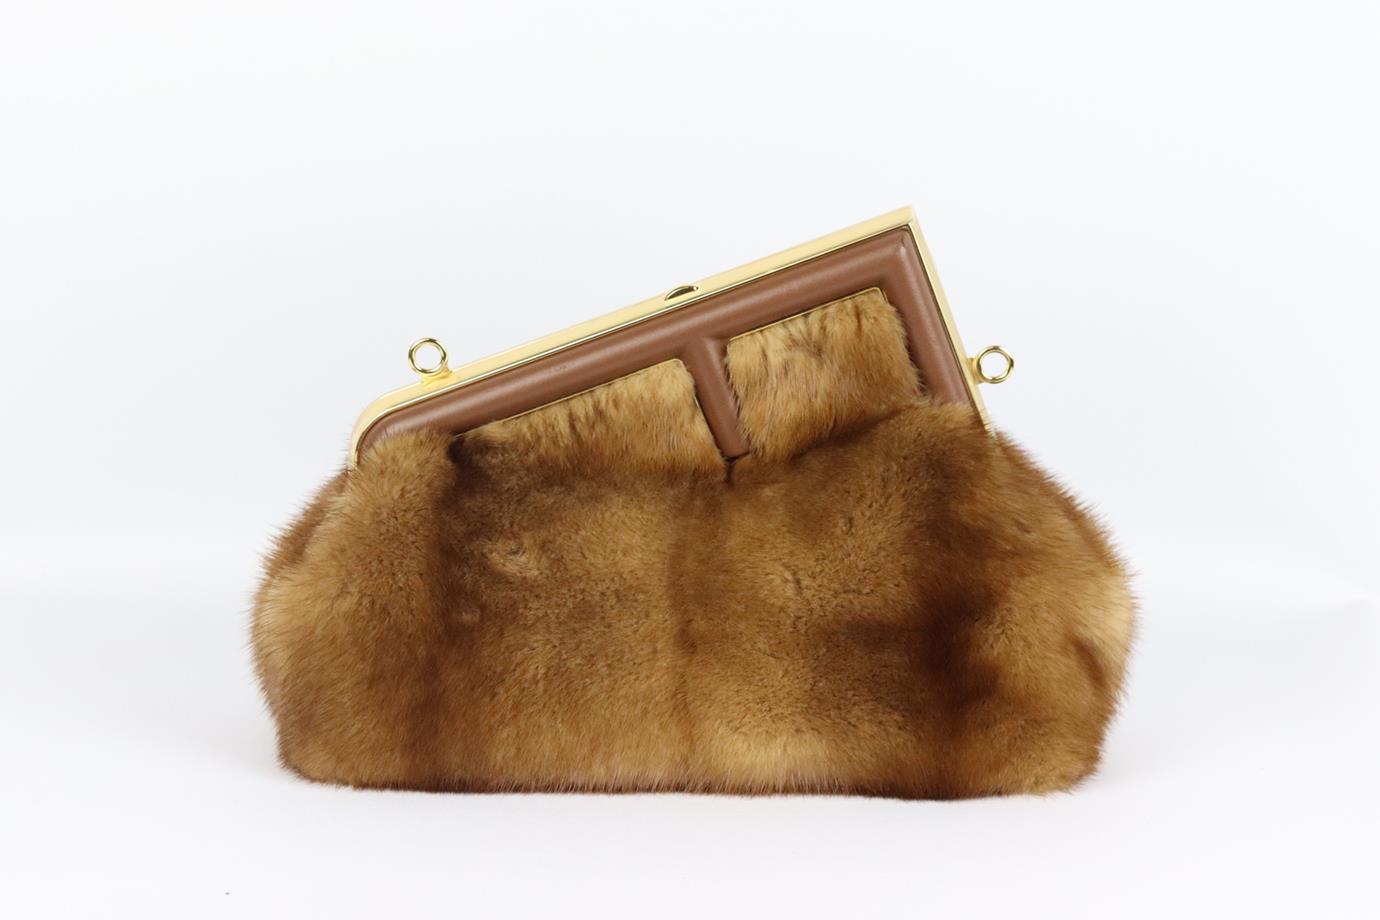 Fendi First small leather trimmed mink fur shoulder bag. Brown. Push lock fastening at top. Comes with dustbag. Protective plastic attached. Height: 7.9 in. Width: 10 in. Depth: 4.5 in. Strap Drop: 18.5 in. Light scuffing along the leather from poor